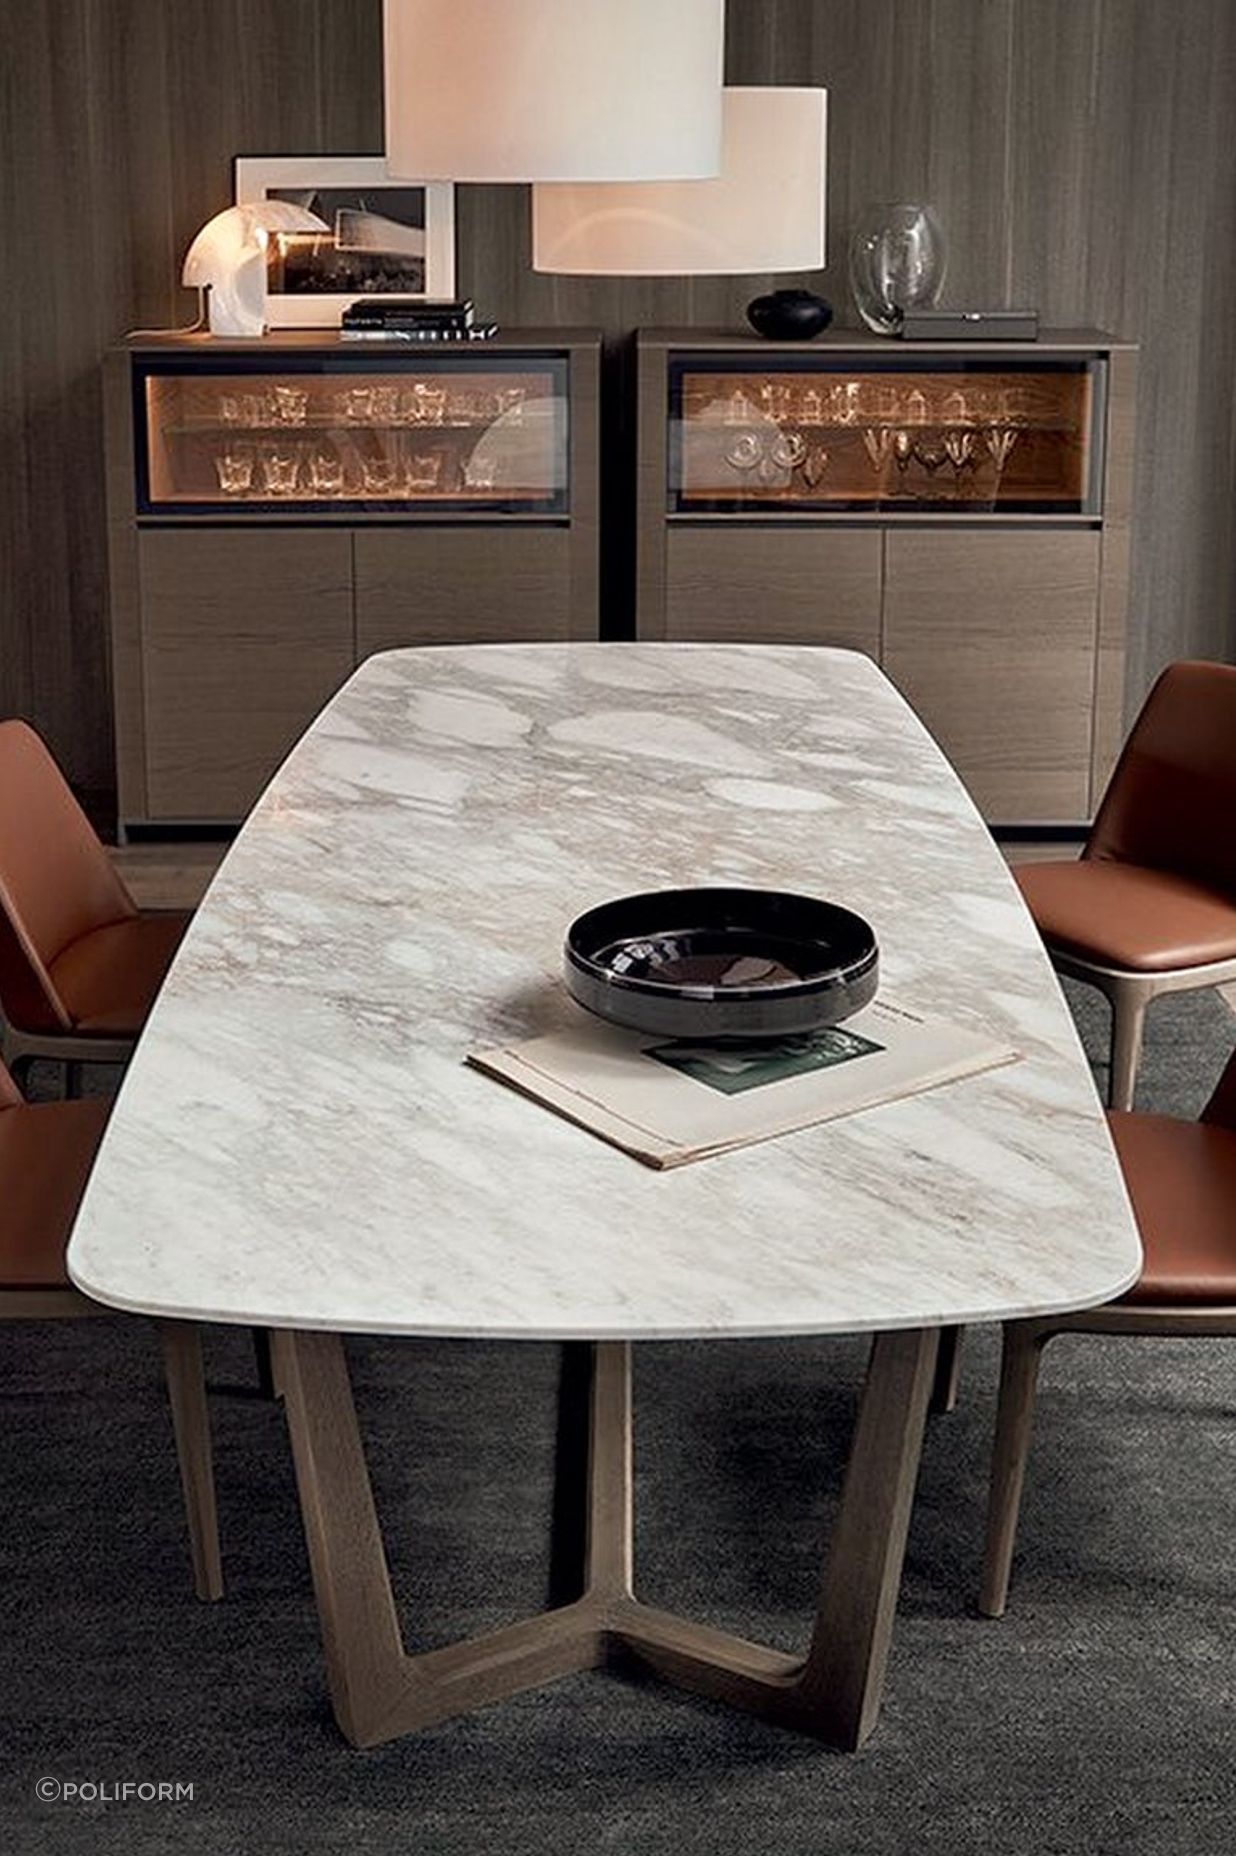 The exquisite Concorde Table with marble tabletop from Poliform